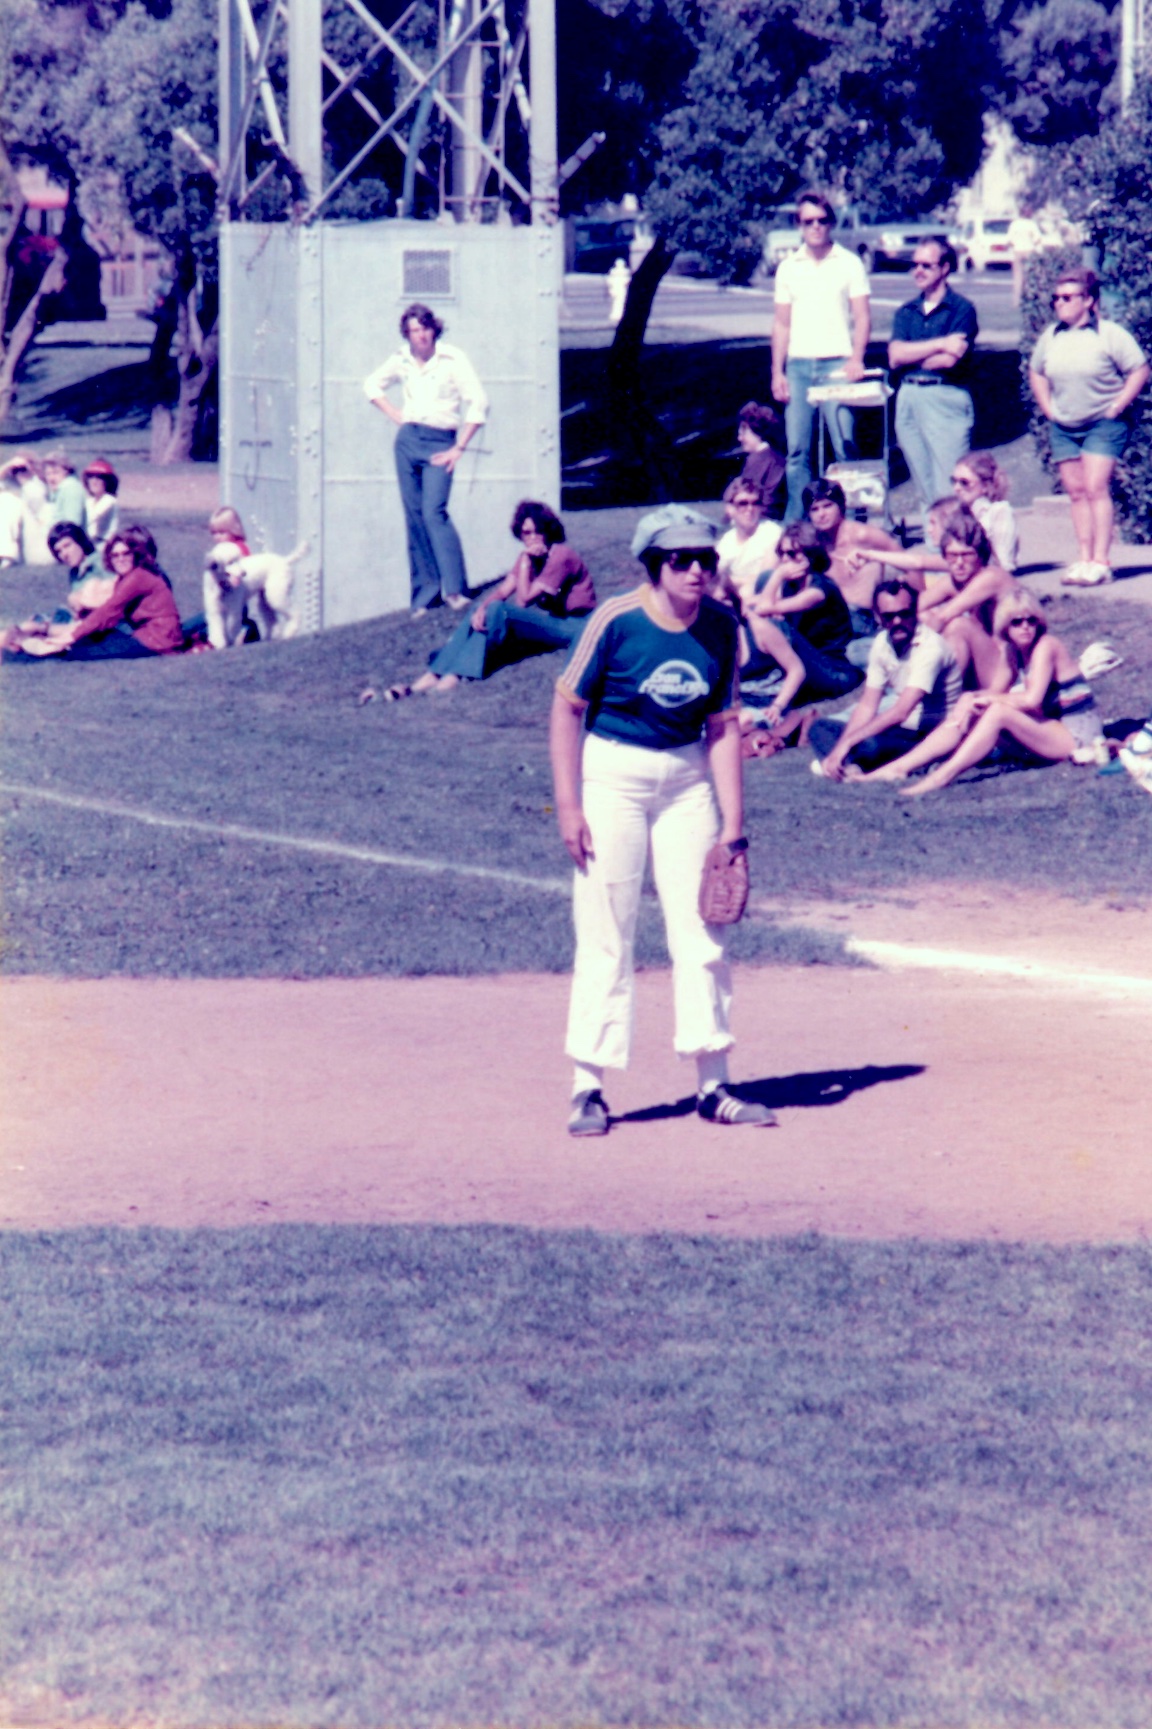 Beth standing at first base, participating in the San Francisco Advertising Softball Women's All    Stars team, 1978, San Francisco, CA. Beth shares, “By now, I realized I had to figure out how to navigate the larger, hetero world with my lesbian community options severely limited. A temp job placed me in the PR Department of the Foote, Cone & Belding/Honig ad agency, where I realized all the things my DOB friends and I had been doing to educate people about lesbianism were professional things for which there were names. I got asked to play softball with the women’s team, and got my first real coaching as an adult woman—and a spot on the San Francisco Women’s Ad League All Star team. It was a coming of age experience.” Photo courtesy of Beth Elliott.